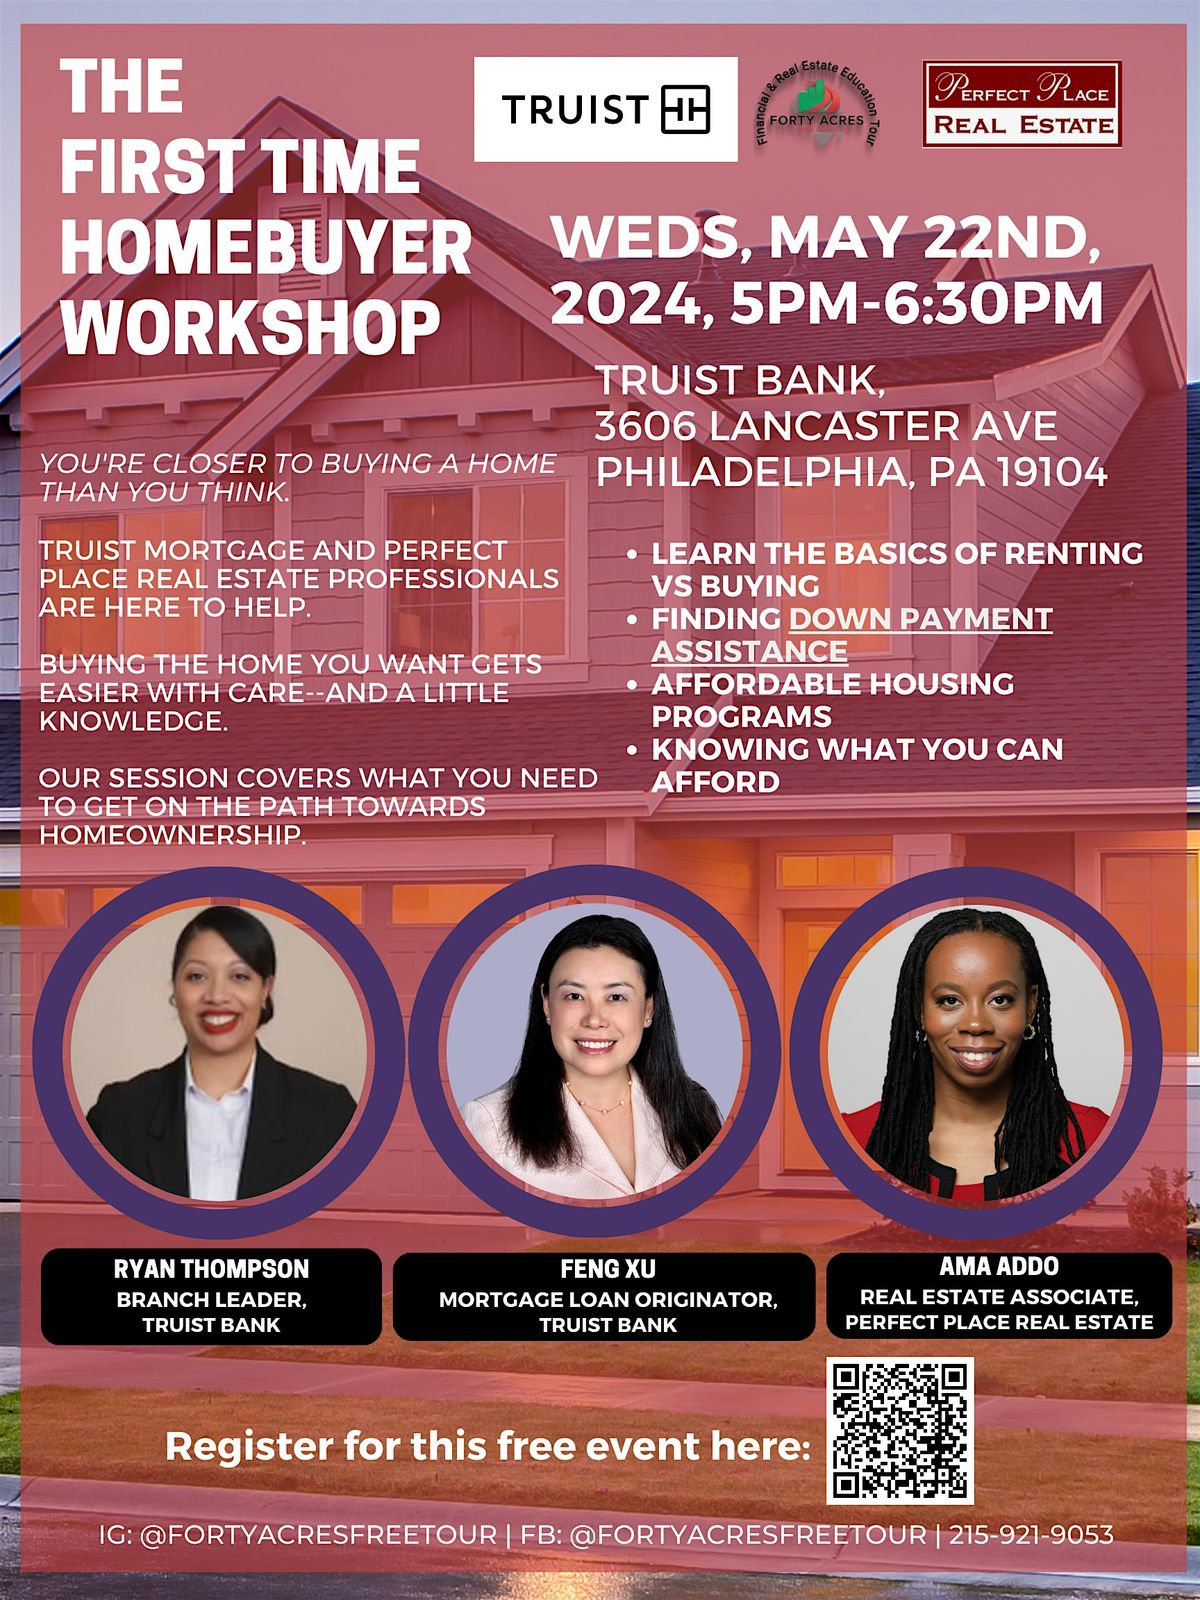 The First Time Homebuyer's Workshop